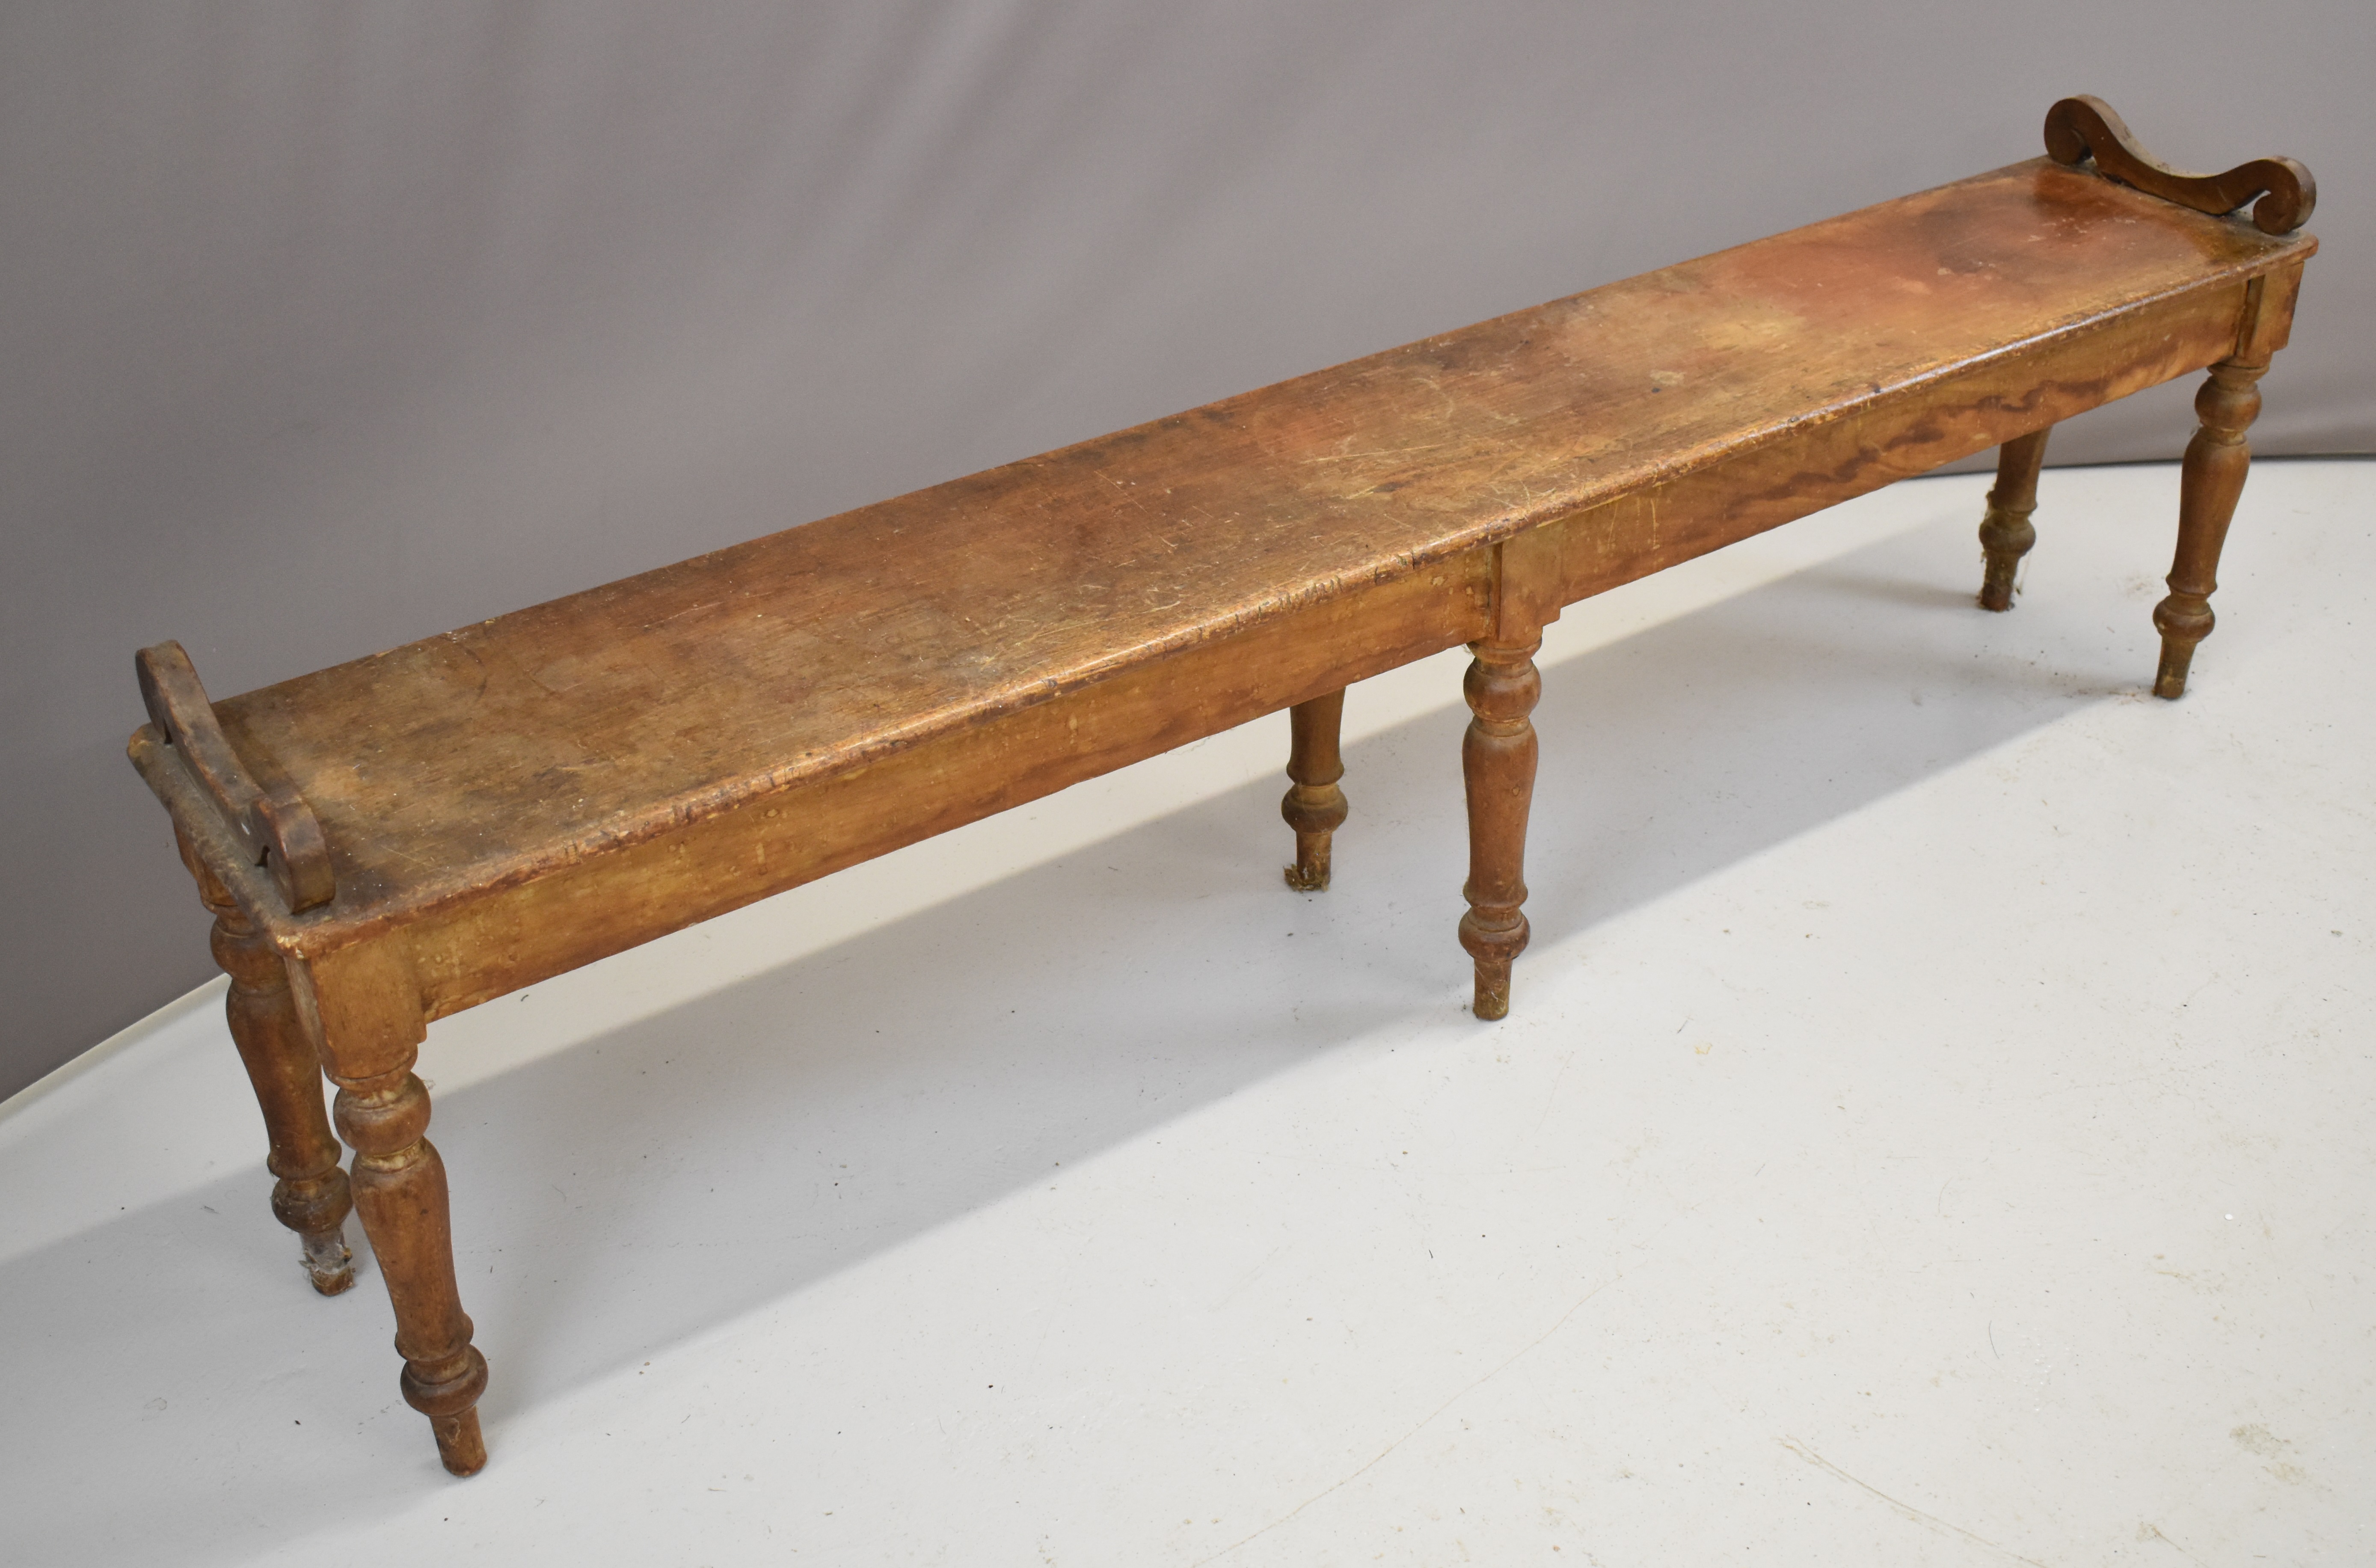 19thC ash window seat or low bench with scroll ends, raised on six turned legs, W193 x D30 x H46cm - Image 2 of 4